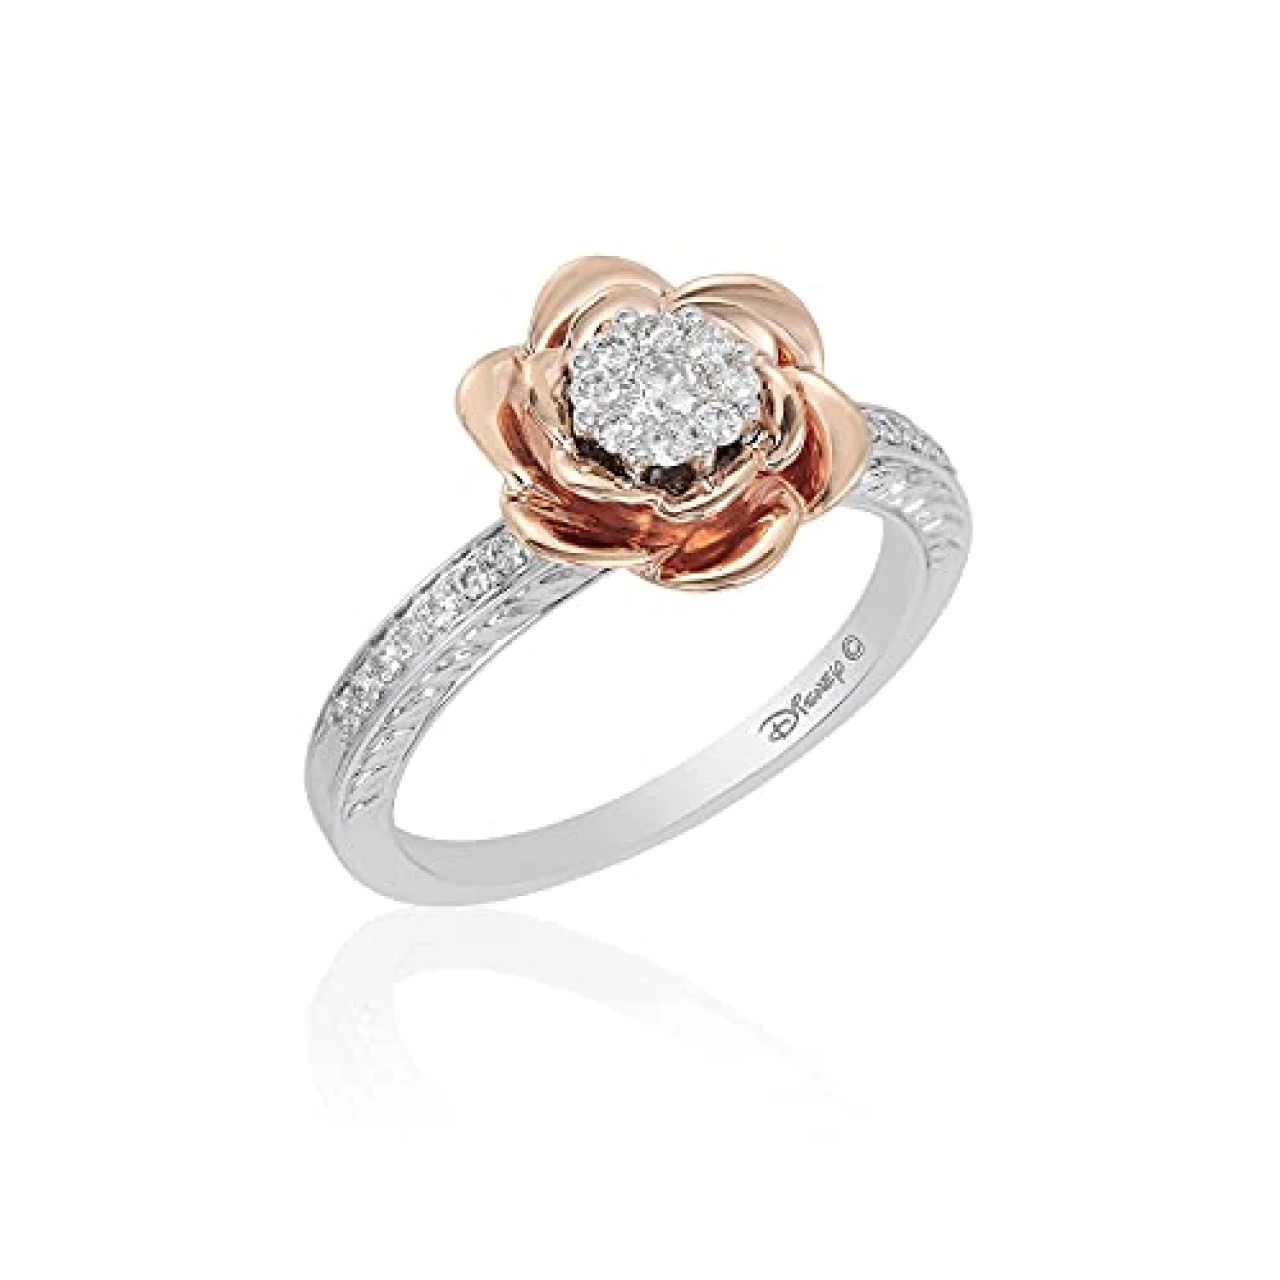 Jewelili Enchanted Disney Fine Jewelry 14K Rose Gold Over Sterling Silver 1/4 Cttw Belle Rose Composite Ring, Size 8